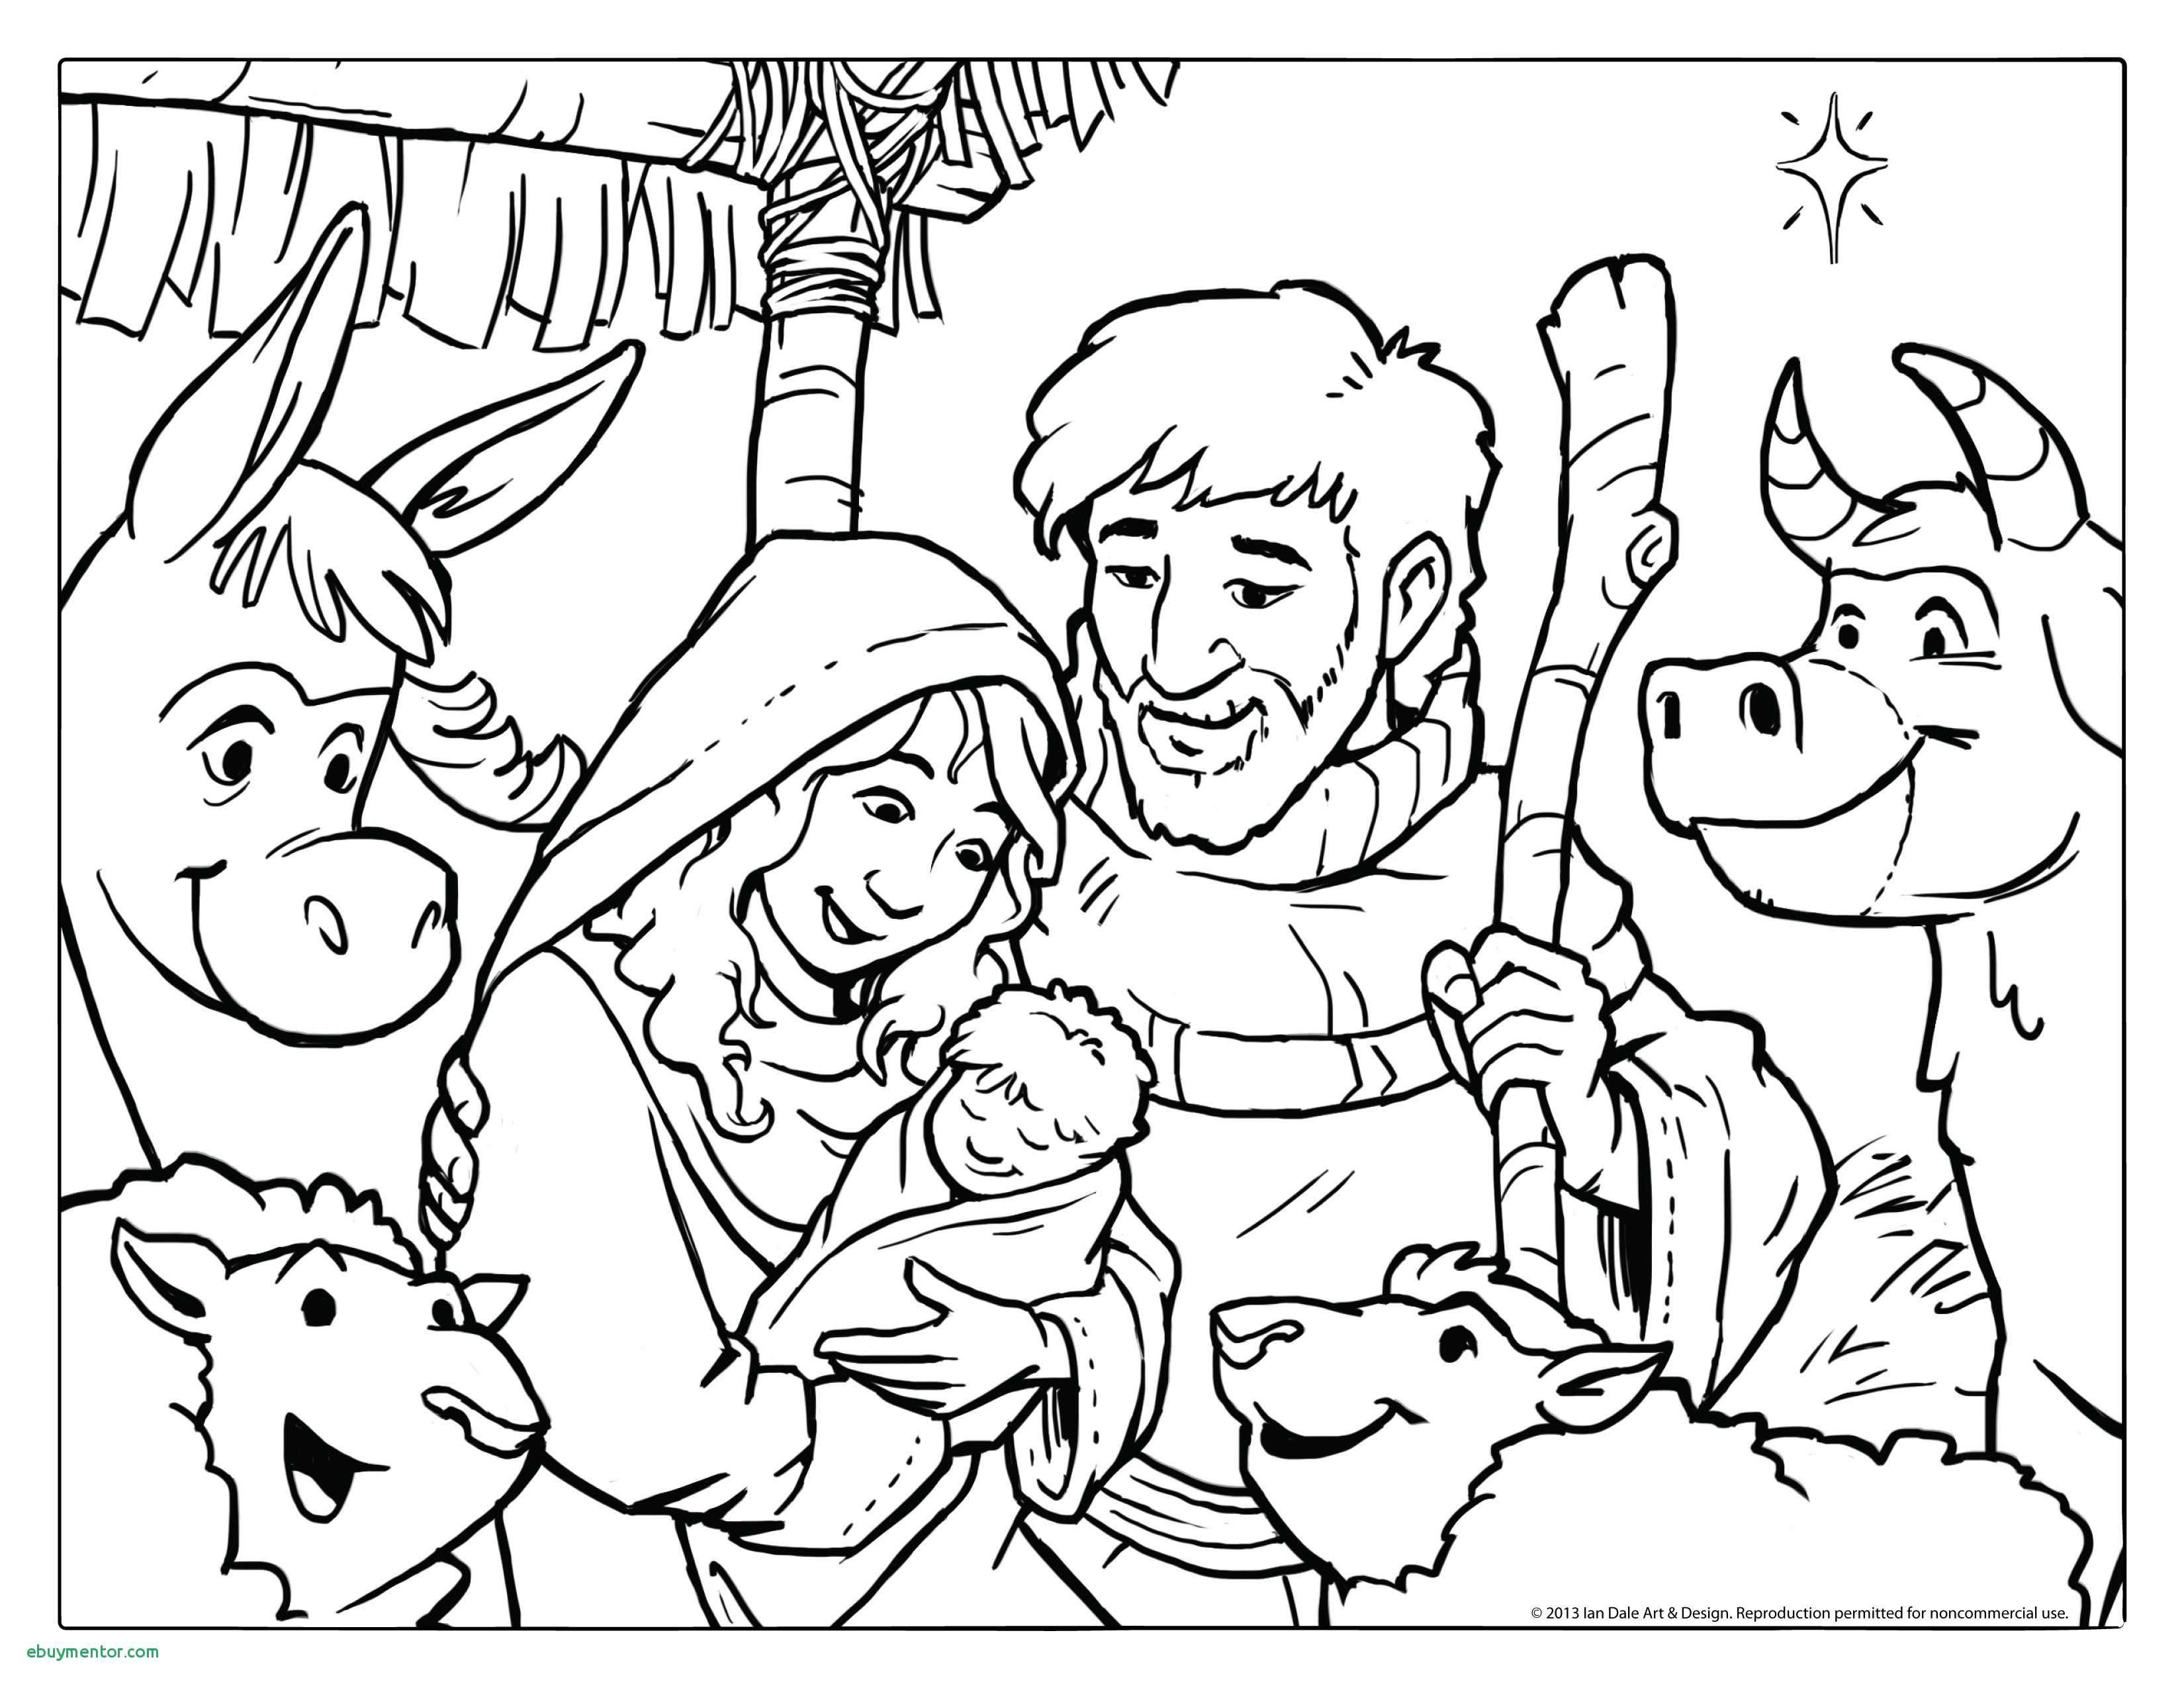 Printable Christmas Coloring Page Snowy Church With Icicles. New - Free Printable Bible Christmas Coloring Pages